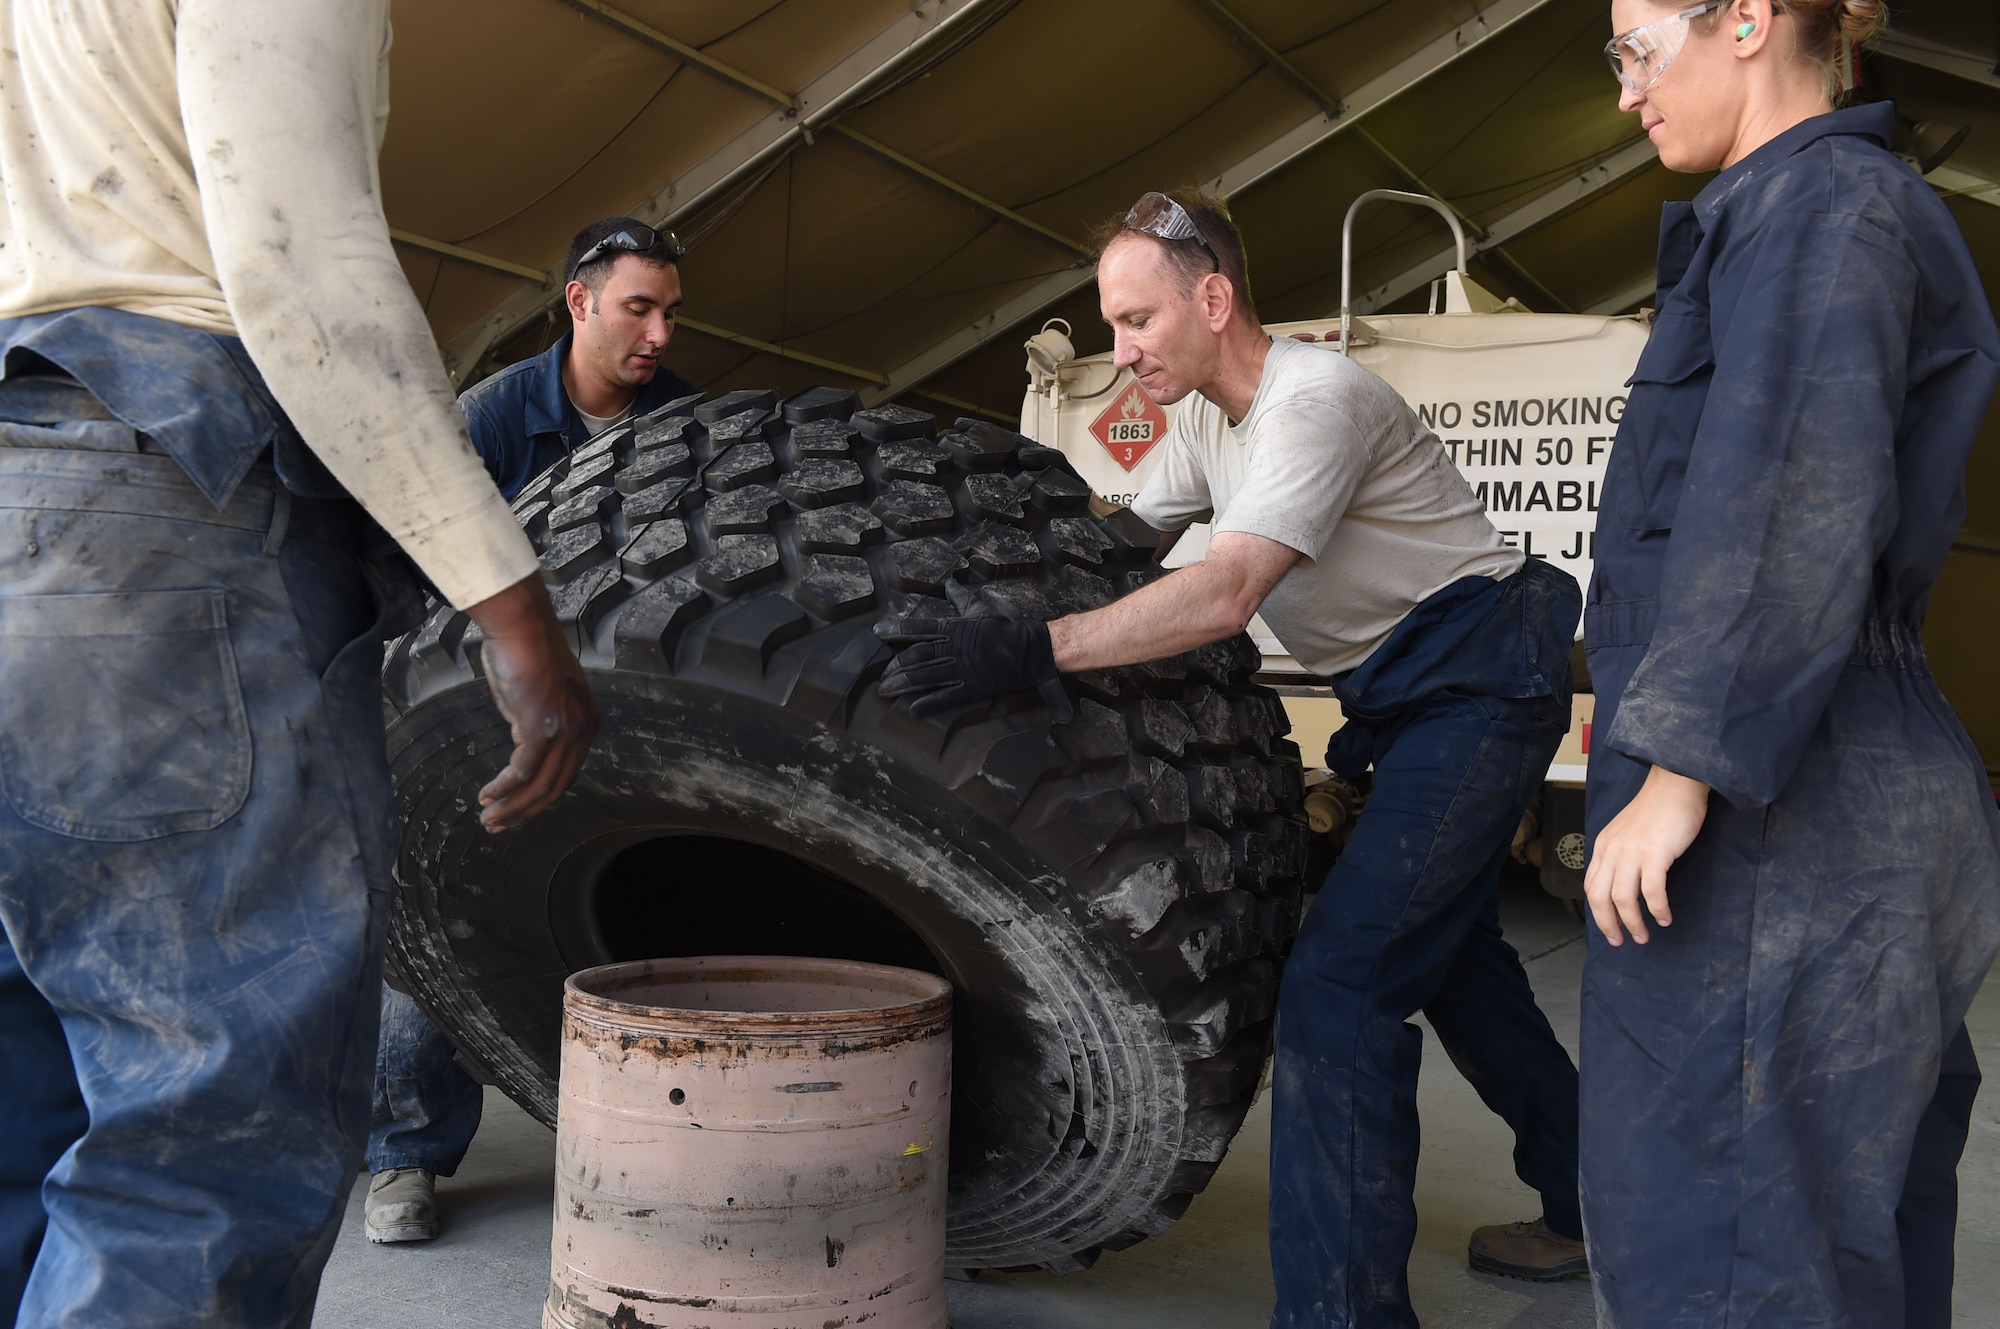 Col. Kevin Eastland, 380th Air Expeditionary Wing vice commander, works with Senior Airman Johnathan, 380th Fire and Refueler Maintenance vehicle maintainer, to flip a new tire onto a rim for a fire truck at an undisclosed location in Southwest Asia, November 16, 2016. With only a few fire trucks, FARM vehicle maintainers have to be diligent in completing required maintenance in order to quickly return the trucks back to operational status and supporting the 380th AEW mission. (U.S. Air Force photo by Tech. Sgt. Christopher Carwile)